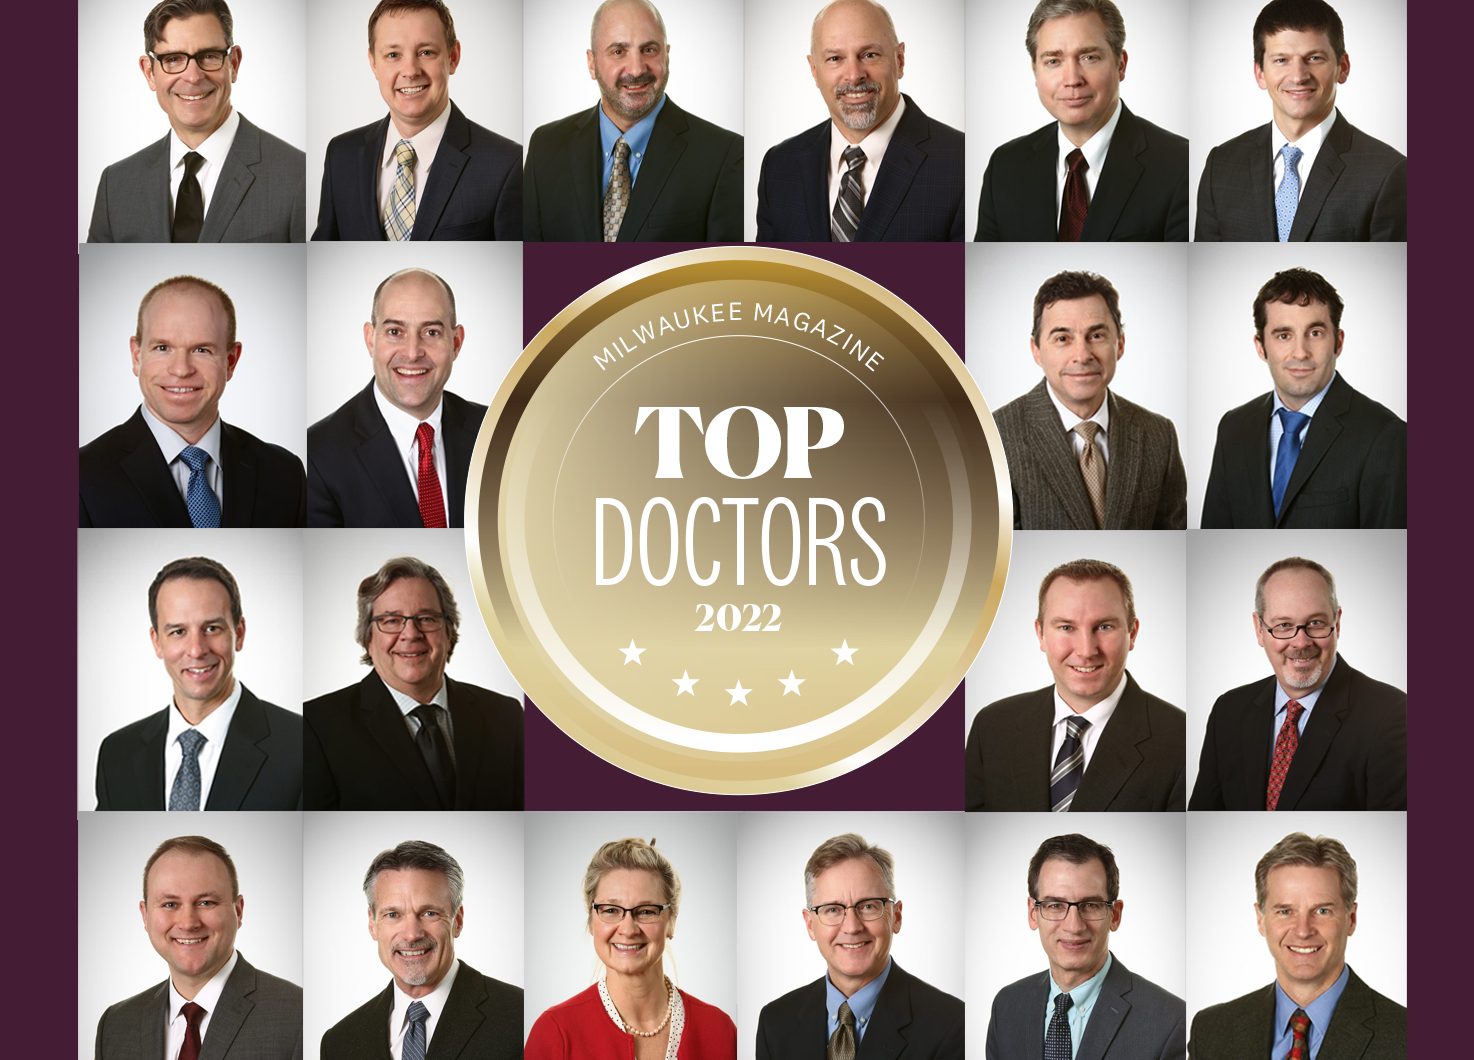 24 OHOW Physicians Named as Top Doctors